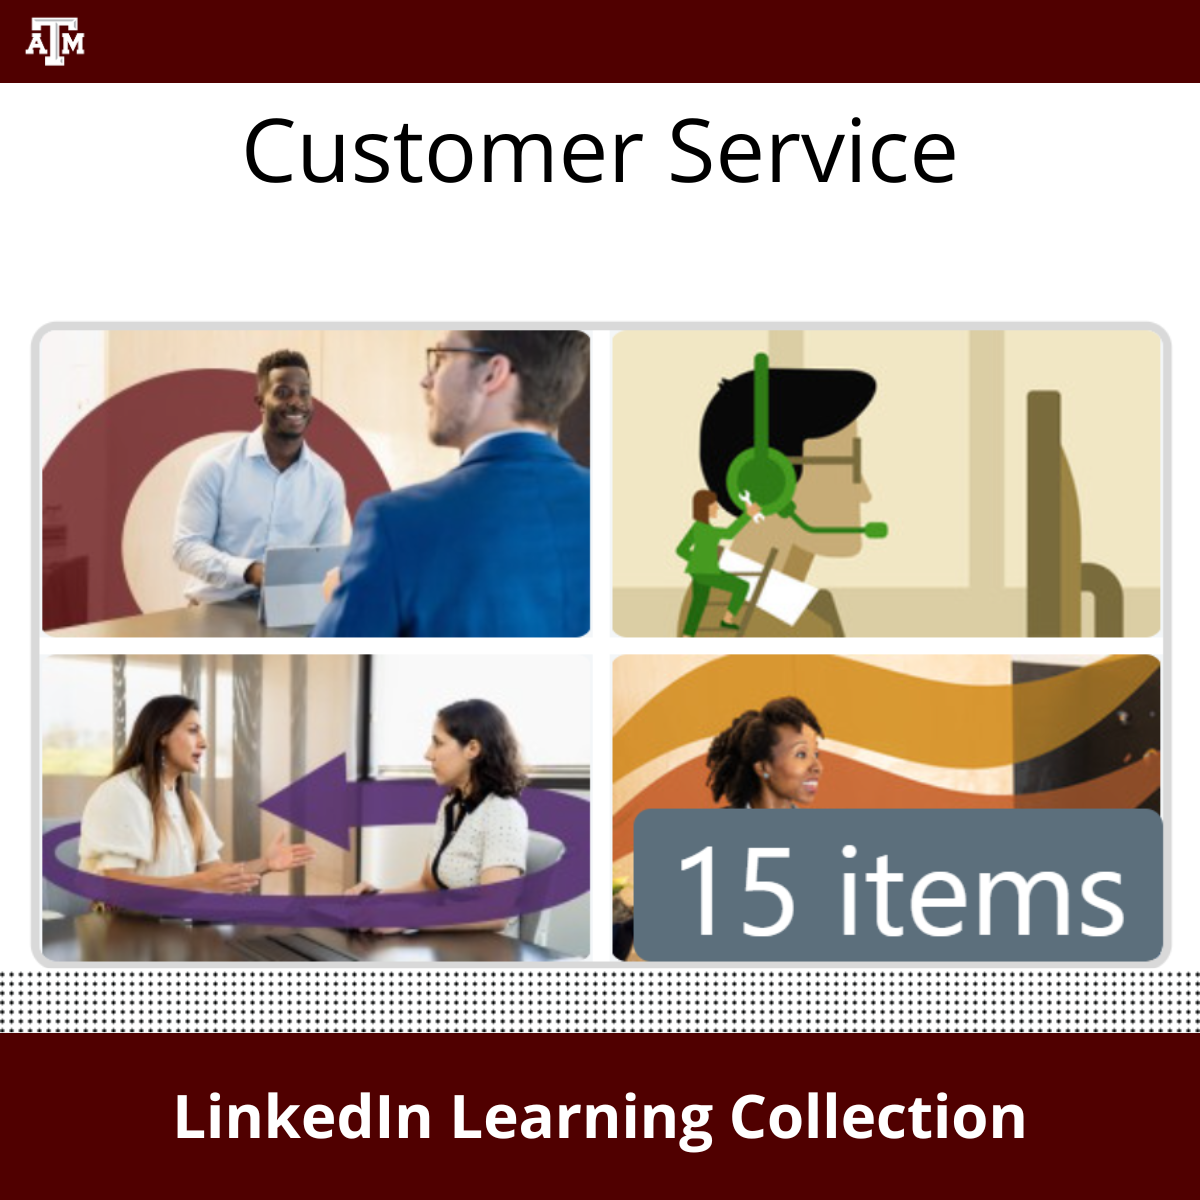 Customer Service LinkedIn Learning Collection